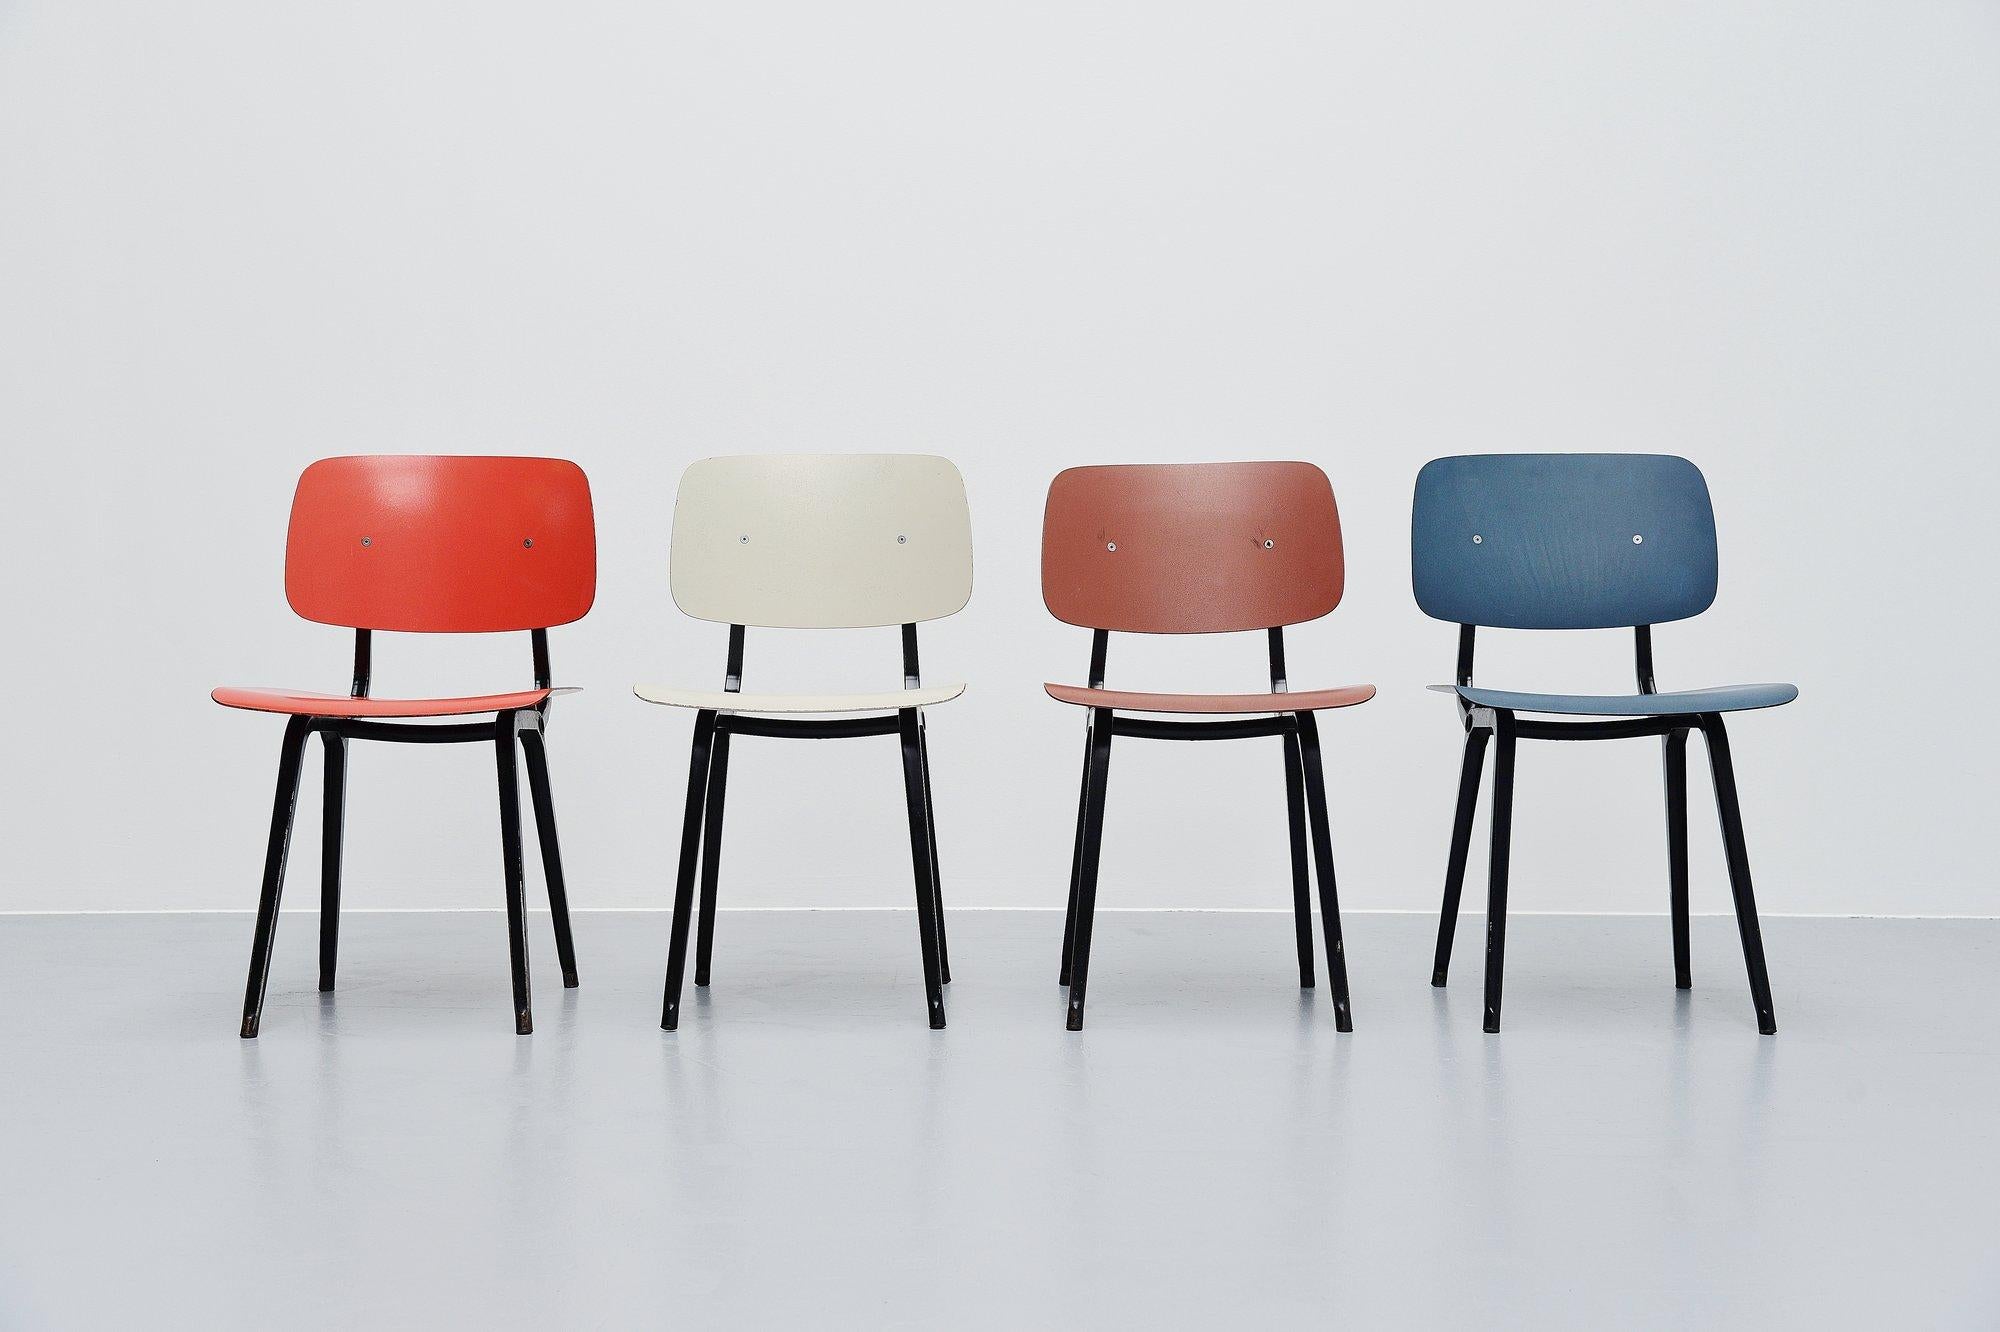 Nice set of 4 Revolt chairs designed by Friso Kramer for Ahrend de Cirkel, Holland 1953. Though the Revolt chair was already designed in 1953, the production started in 1958. The chairs have a folded metal base which is very strong and a ciranol